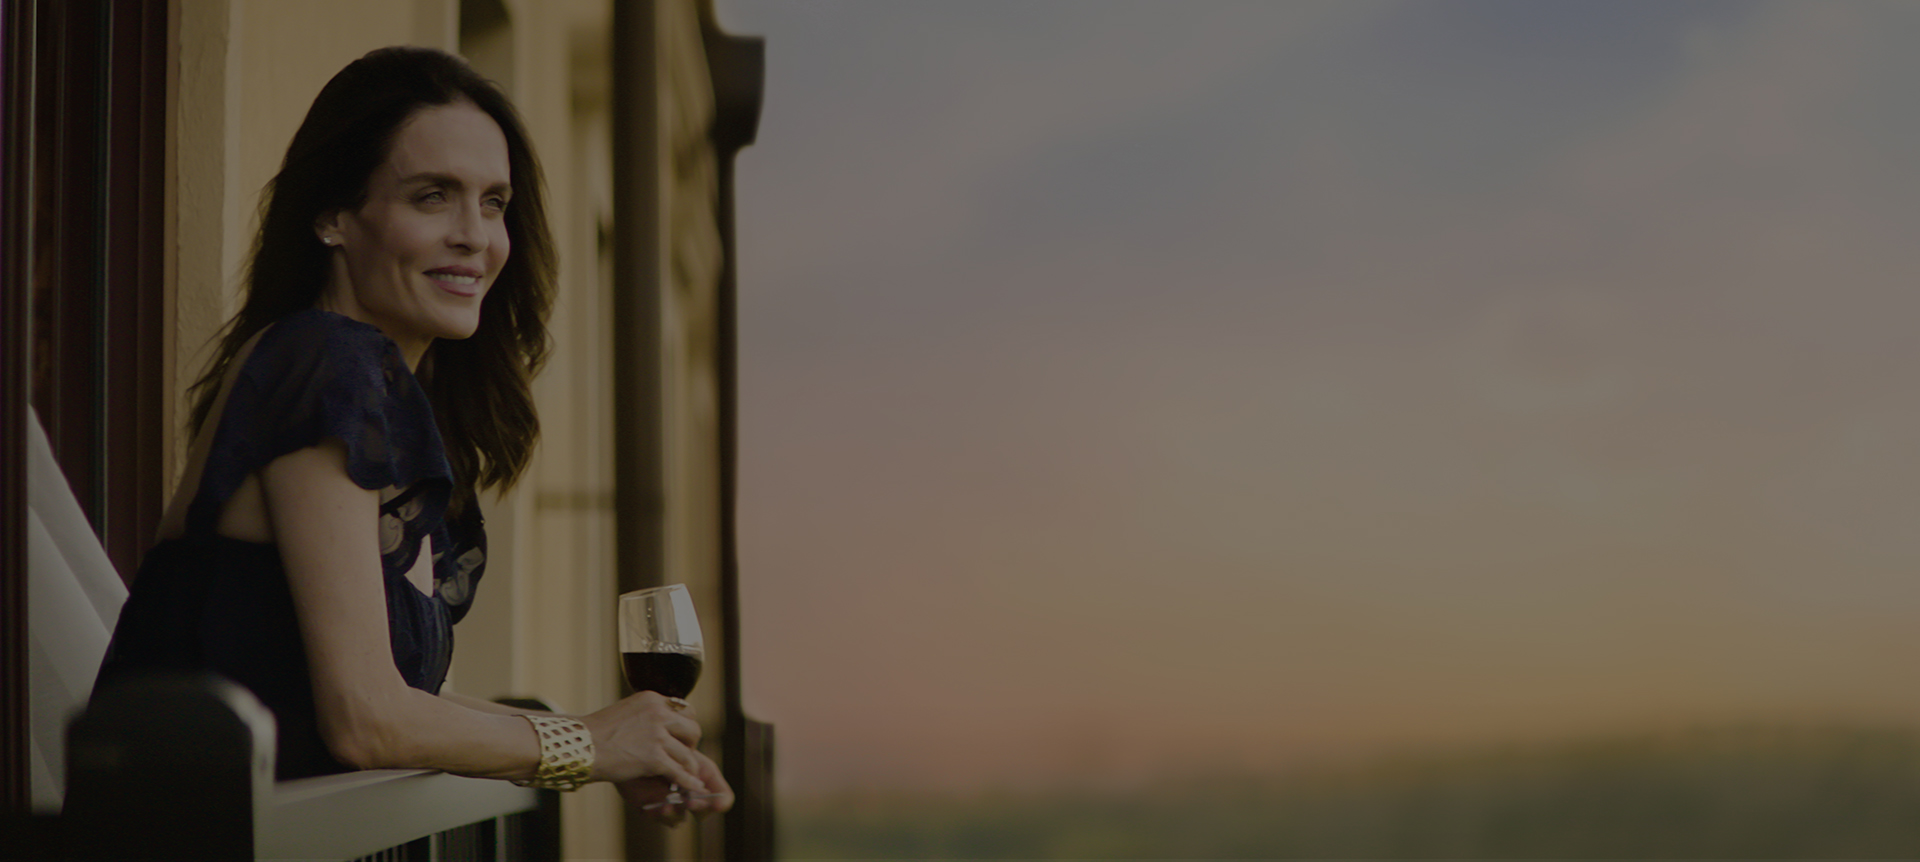 girl looking over her balcony with a glass of wine in her hands